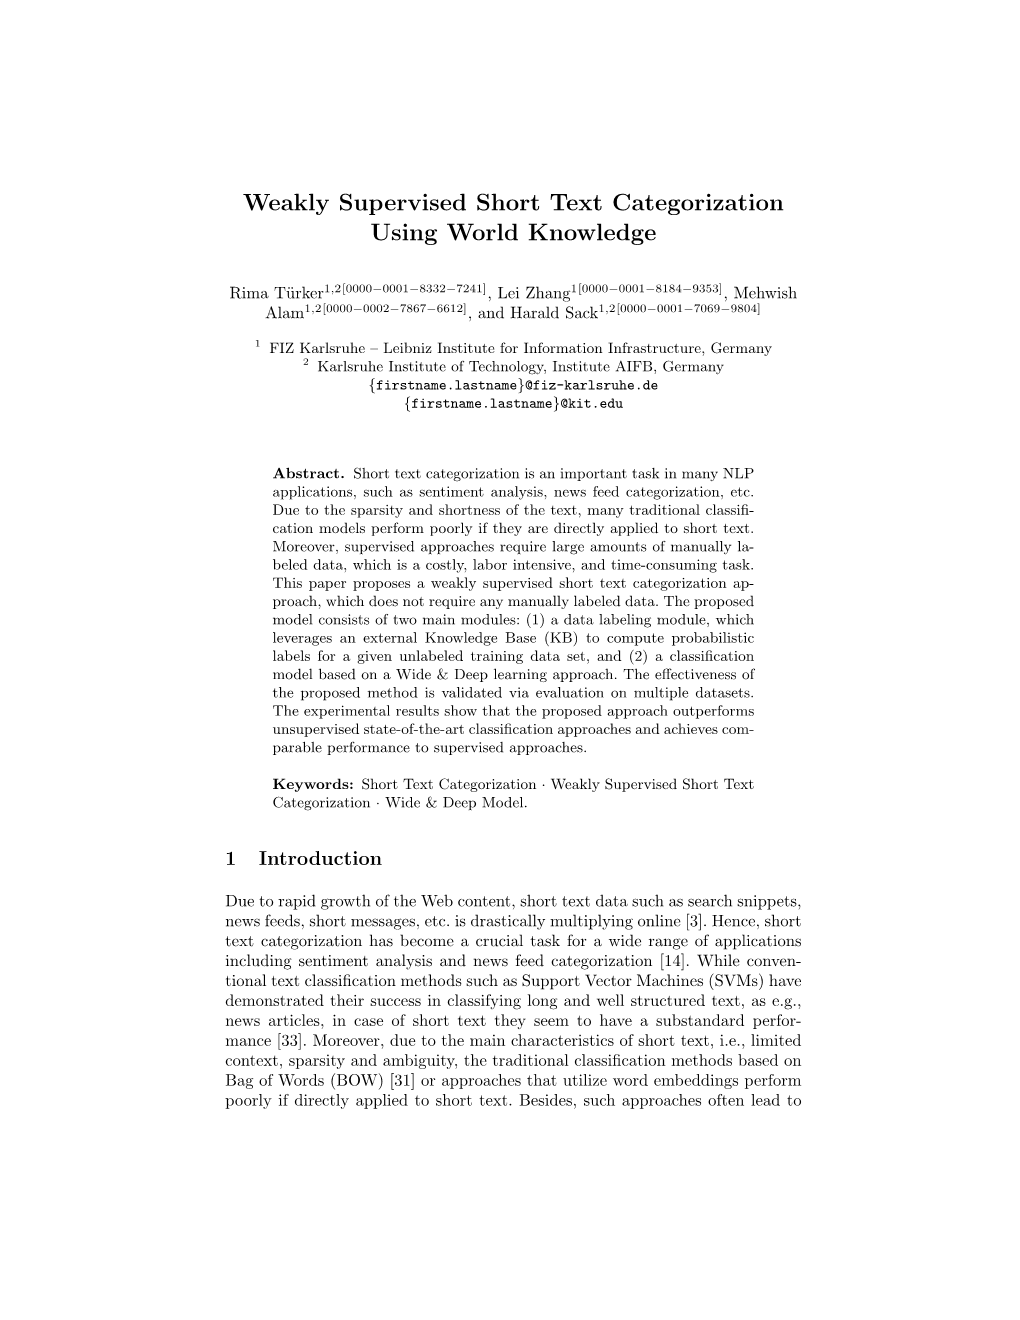 Weakly Supervised Short Text Categorization Using World Knowledge